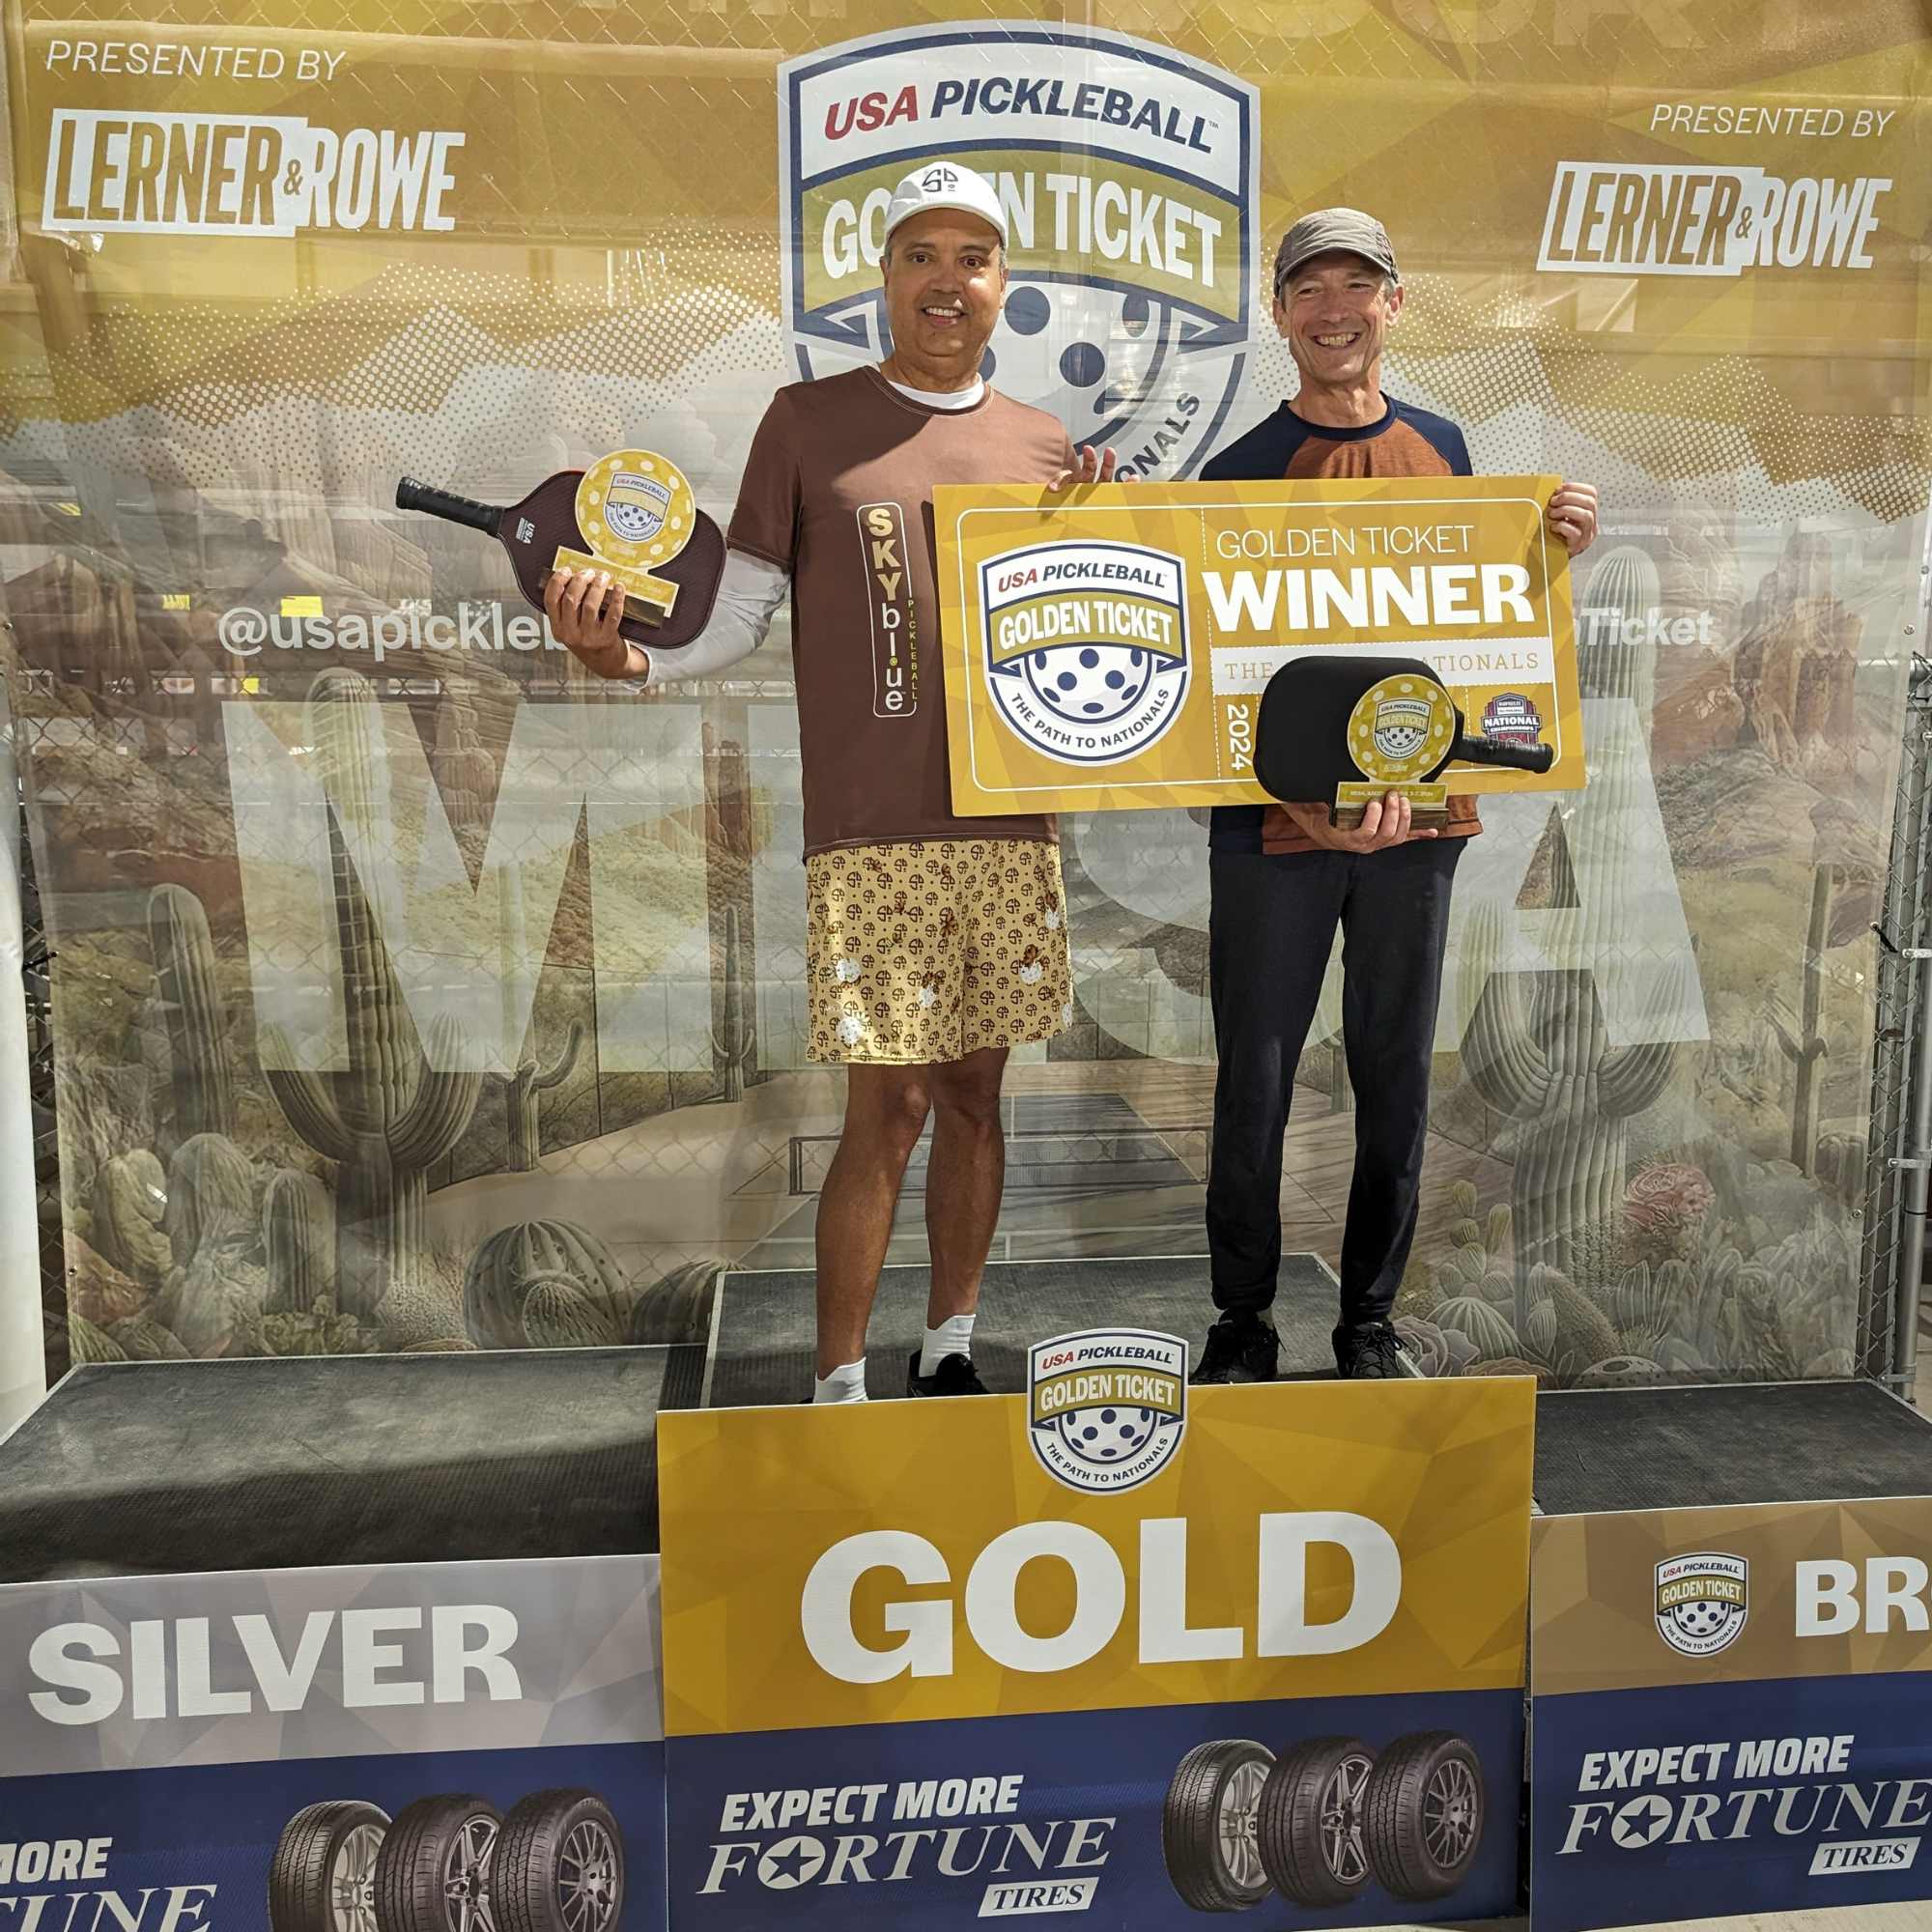 Men's doubles tournament 5.0 55+ at the USA Pickleball Golden Ticket - The Path to Nationals - Mesa Presented by Lerner & Rowe - Gold goes to Shawn Berry & Greg Wolff